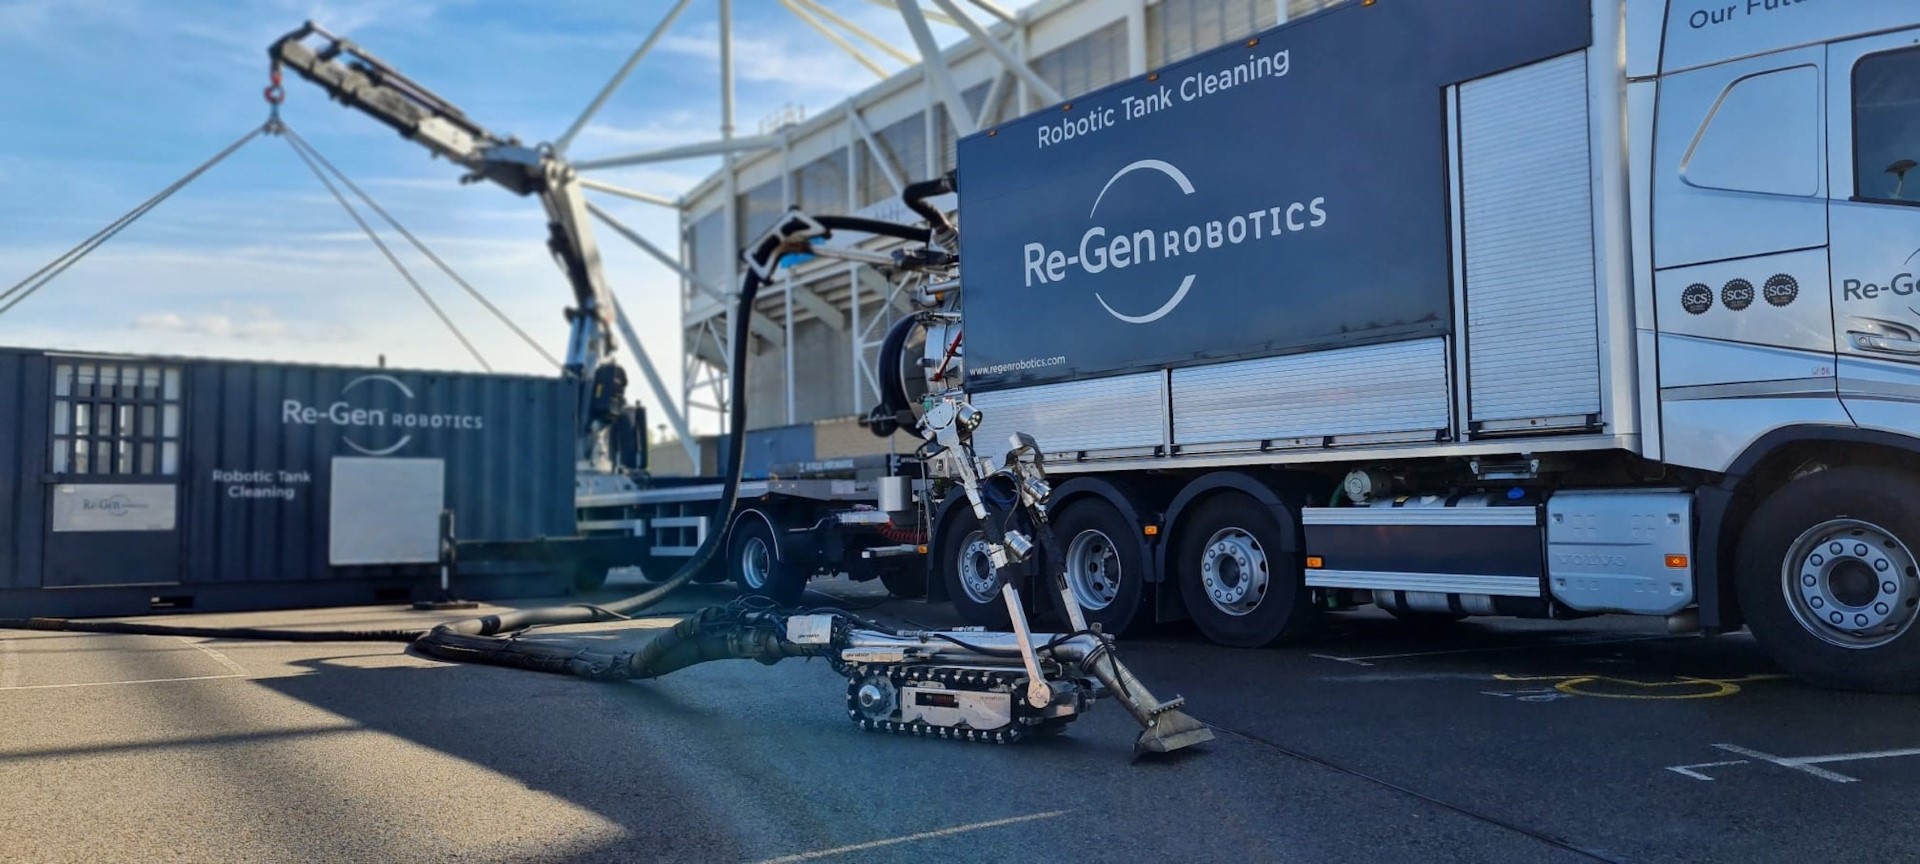 Optimise your tank cleaning operations with Re-Gen Robotics